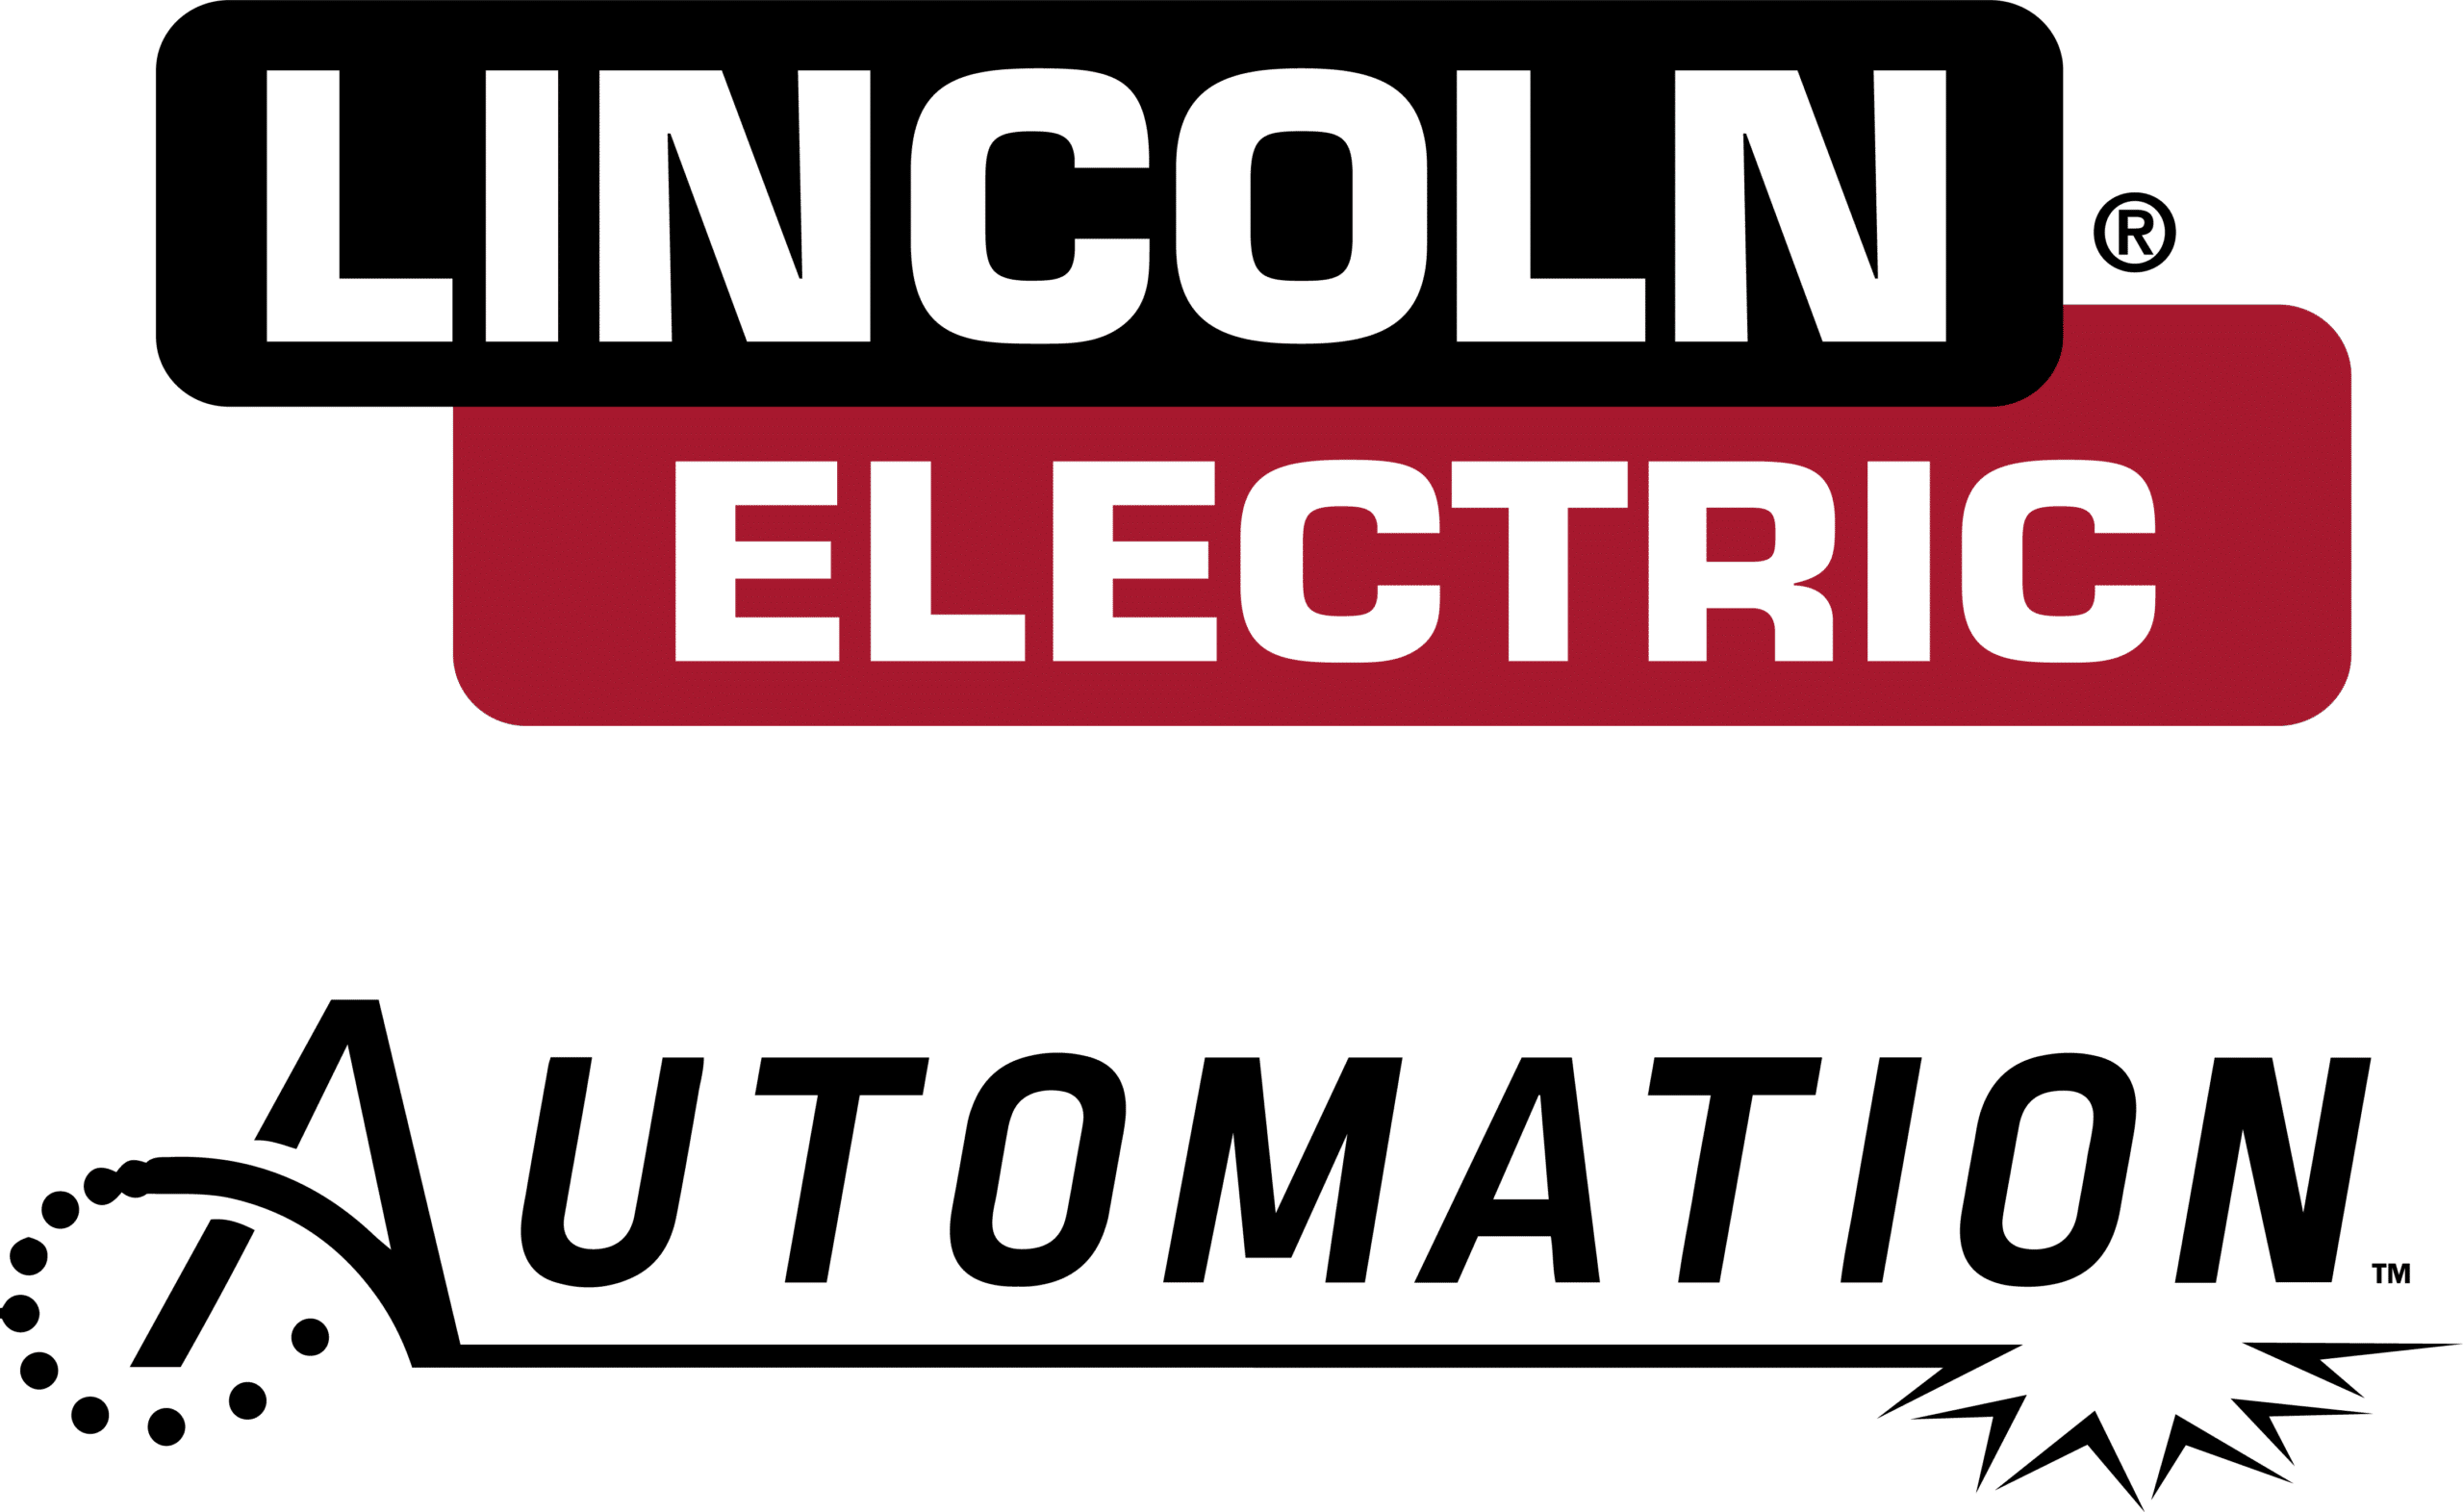 The Lincoln Electric Automation logo in black, red, and white